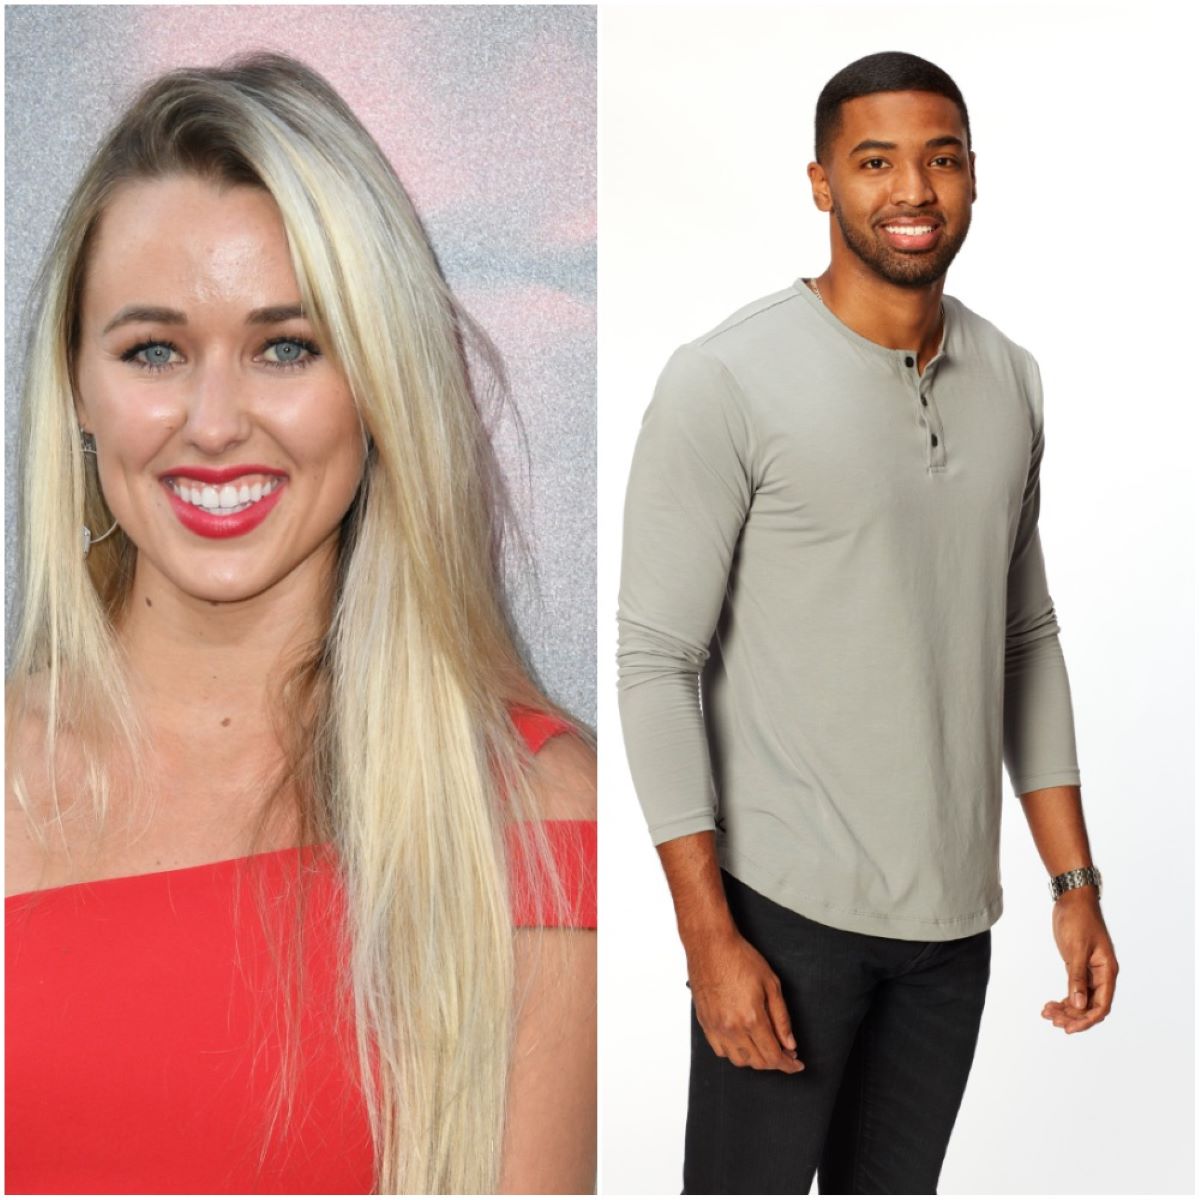 Side by side portraits of potential 'Bachelor in Paradise' cast members Heather Martin and Ivan Hall